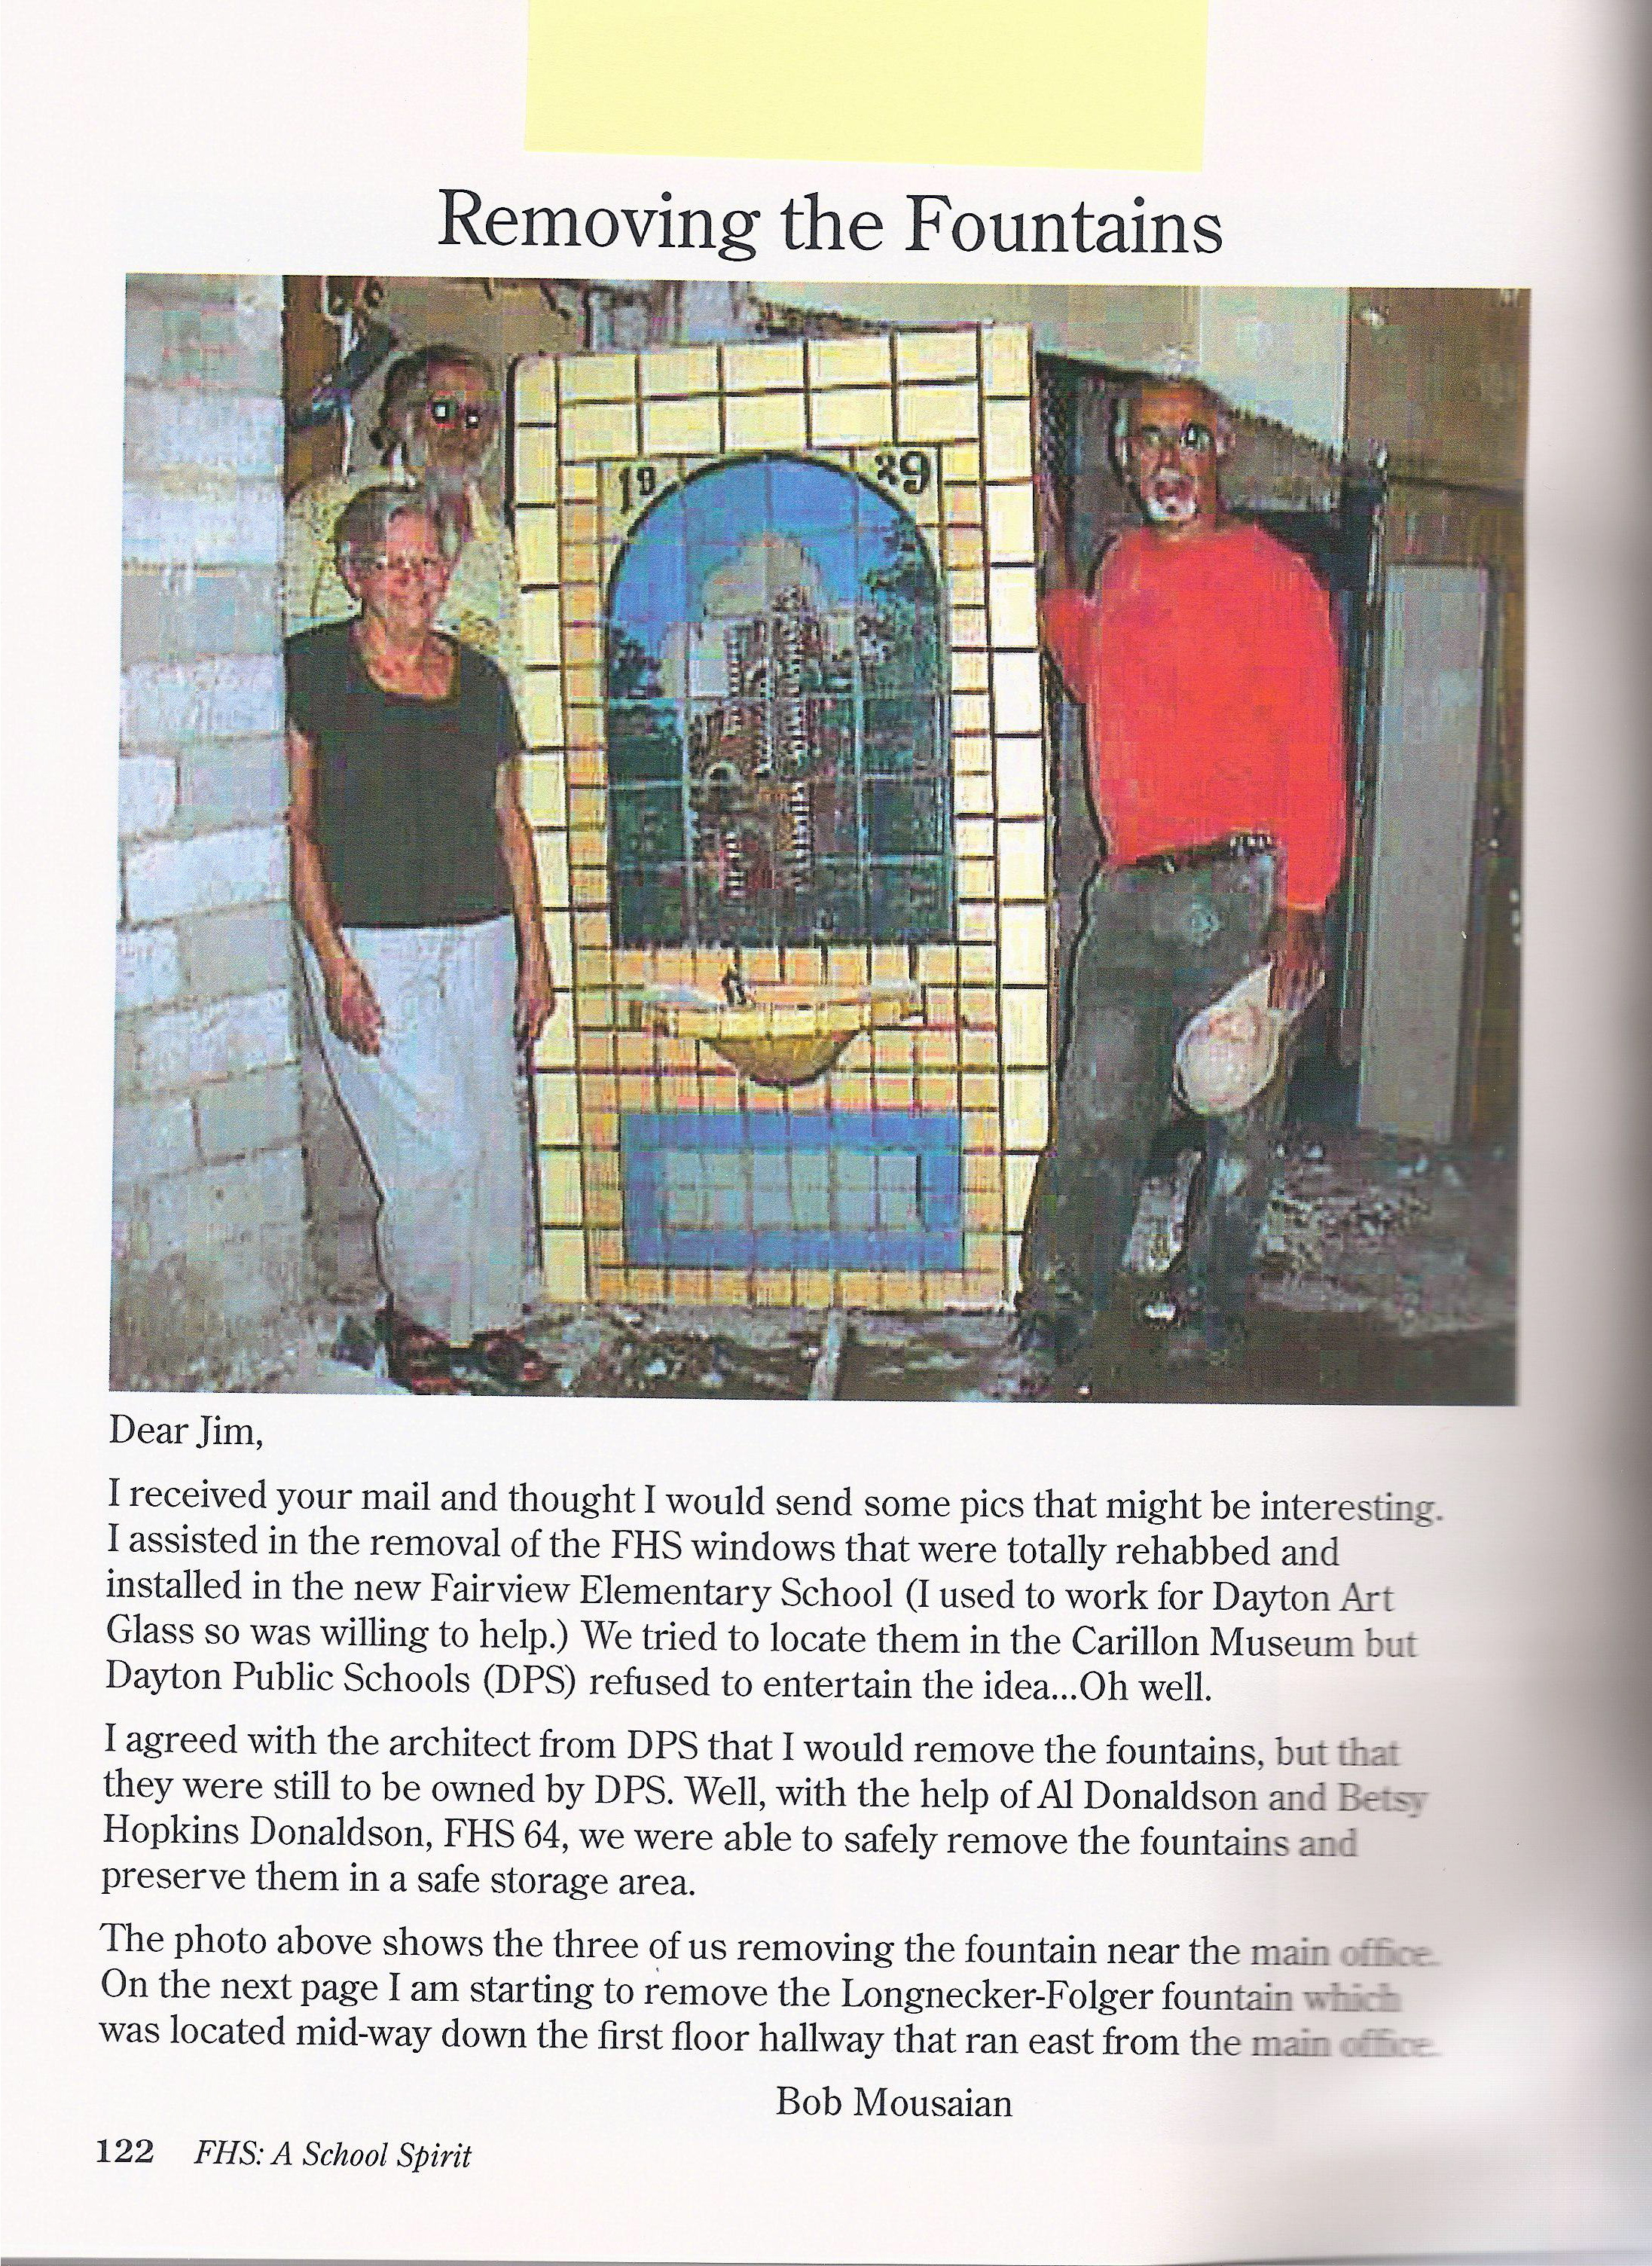 Al Donaldson, Class of '65; Betsy Hopkins, Class of '63; and Bob Mousaian, Class of '62; shown resting after removing the Rookwood Fairview Tower Fountain. They also removed the Folger Longnecker Fountain. This photo is of a page taken from a book about F